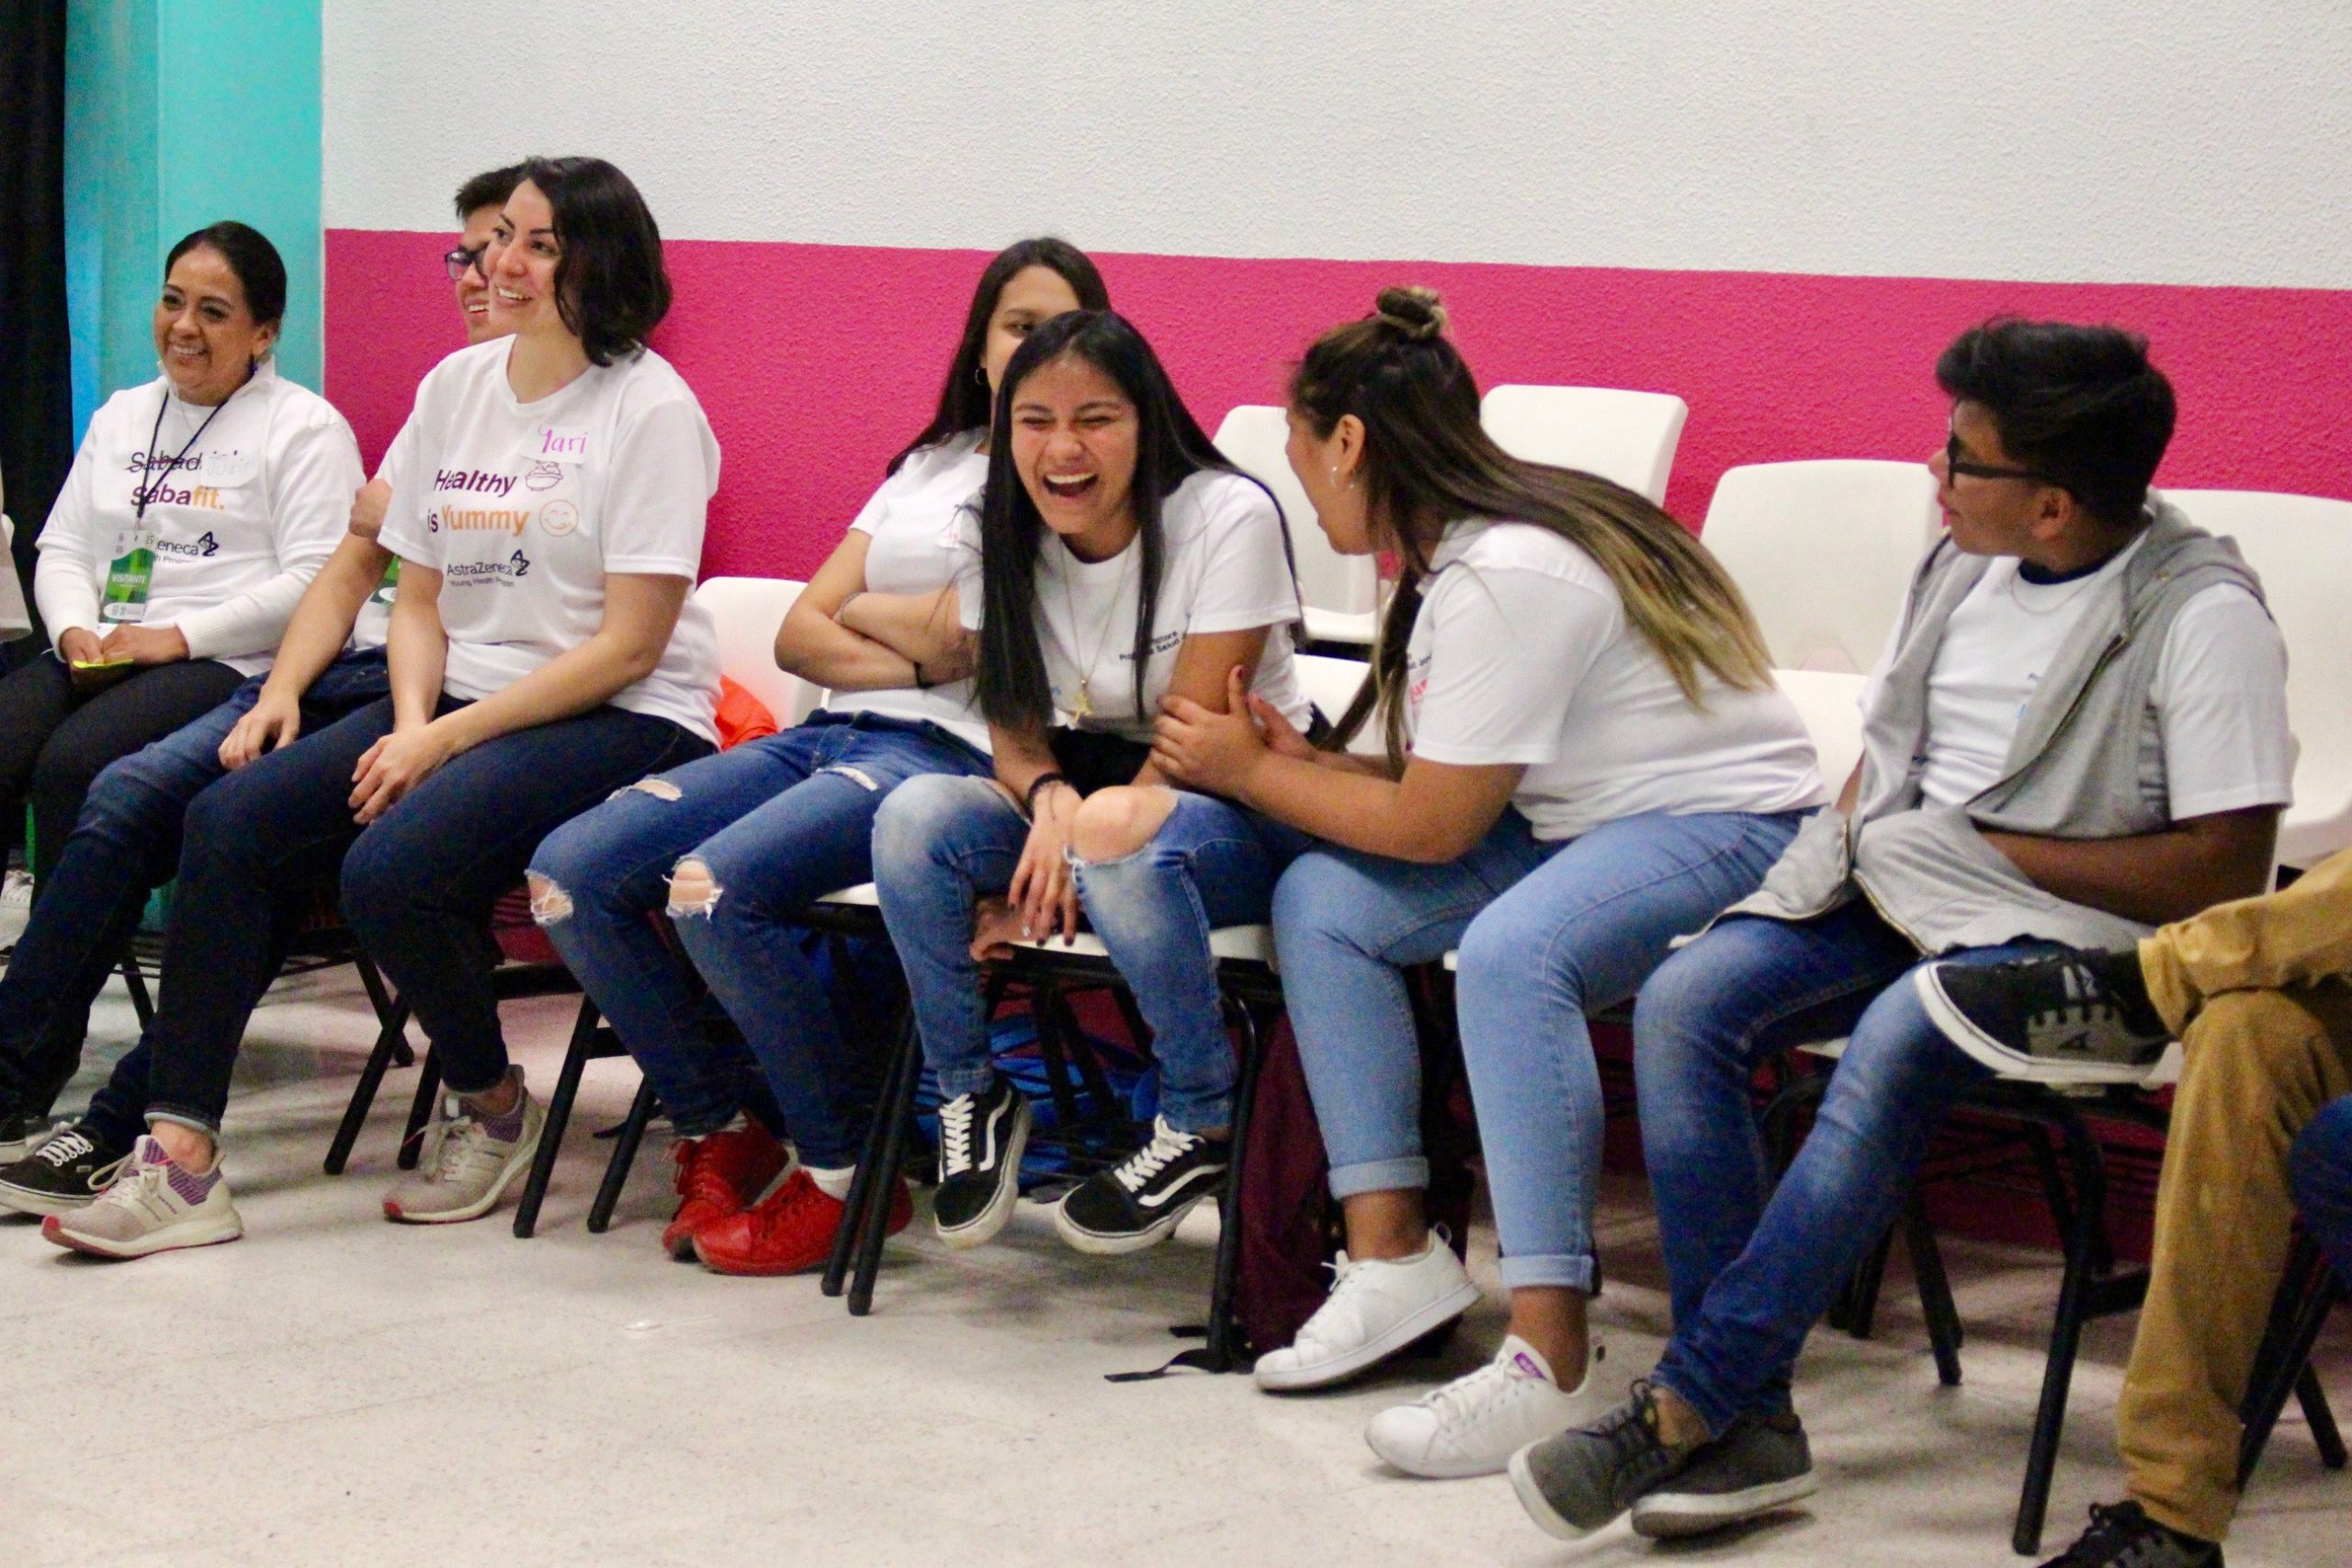 Students at a Young Health Program meeting in Mexico.